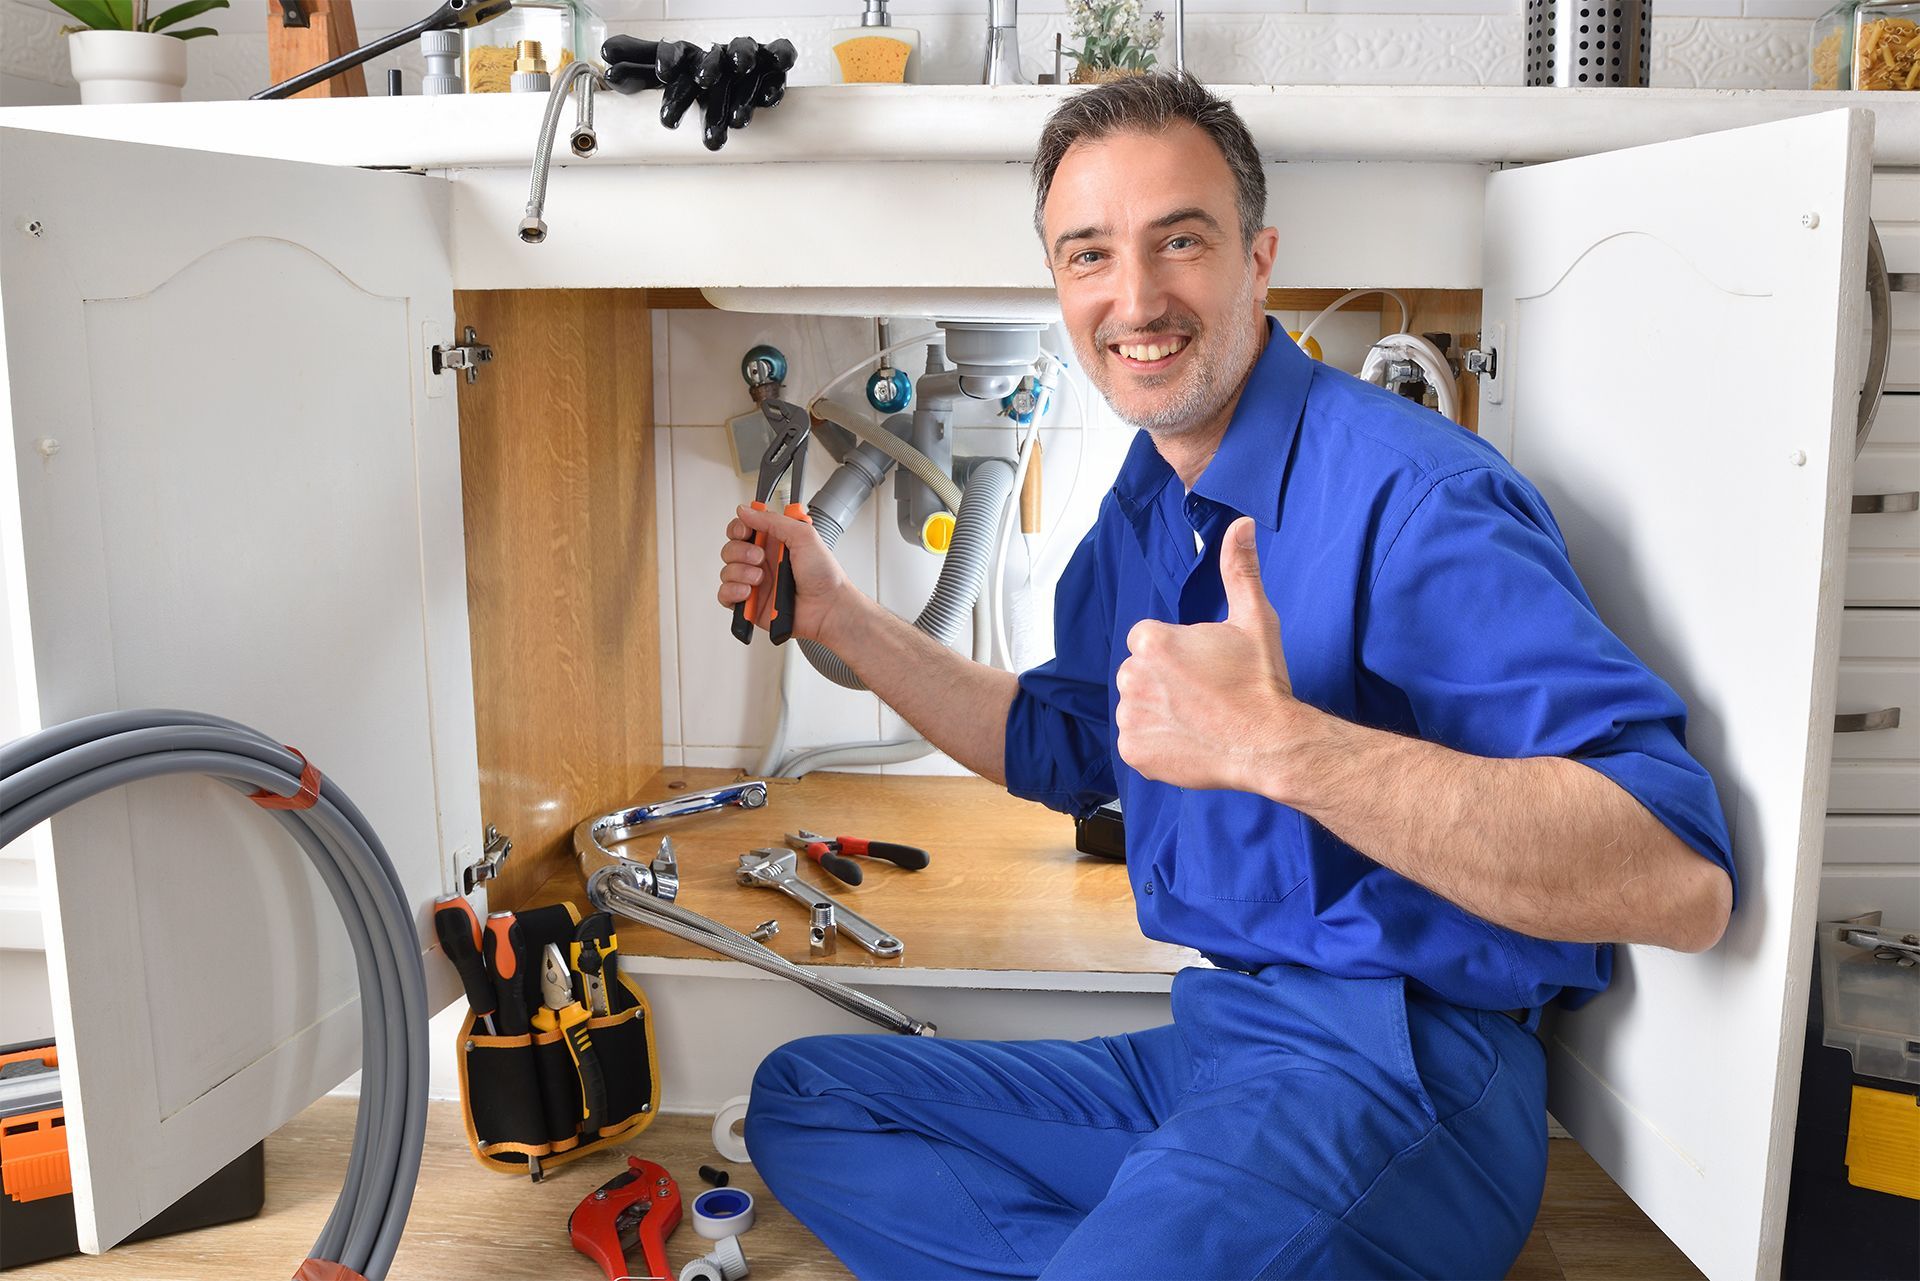 Smiling Plumber Fixing the Kitchen Sink